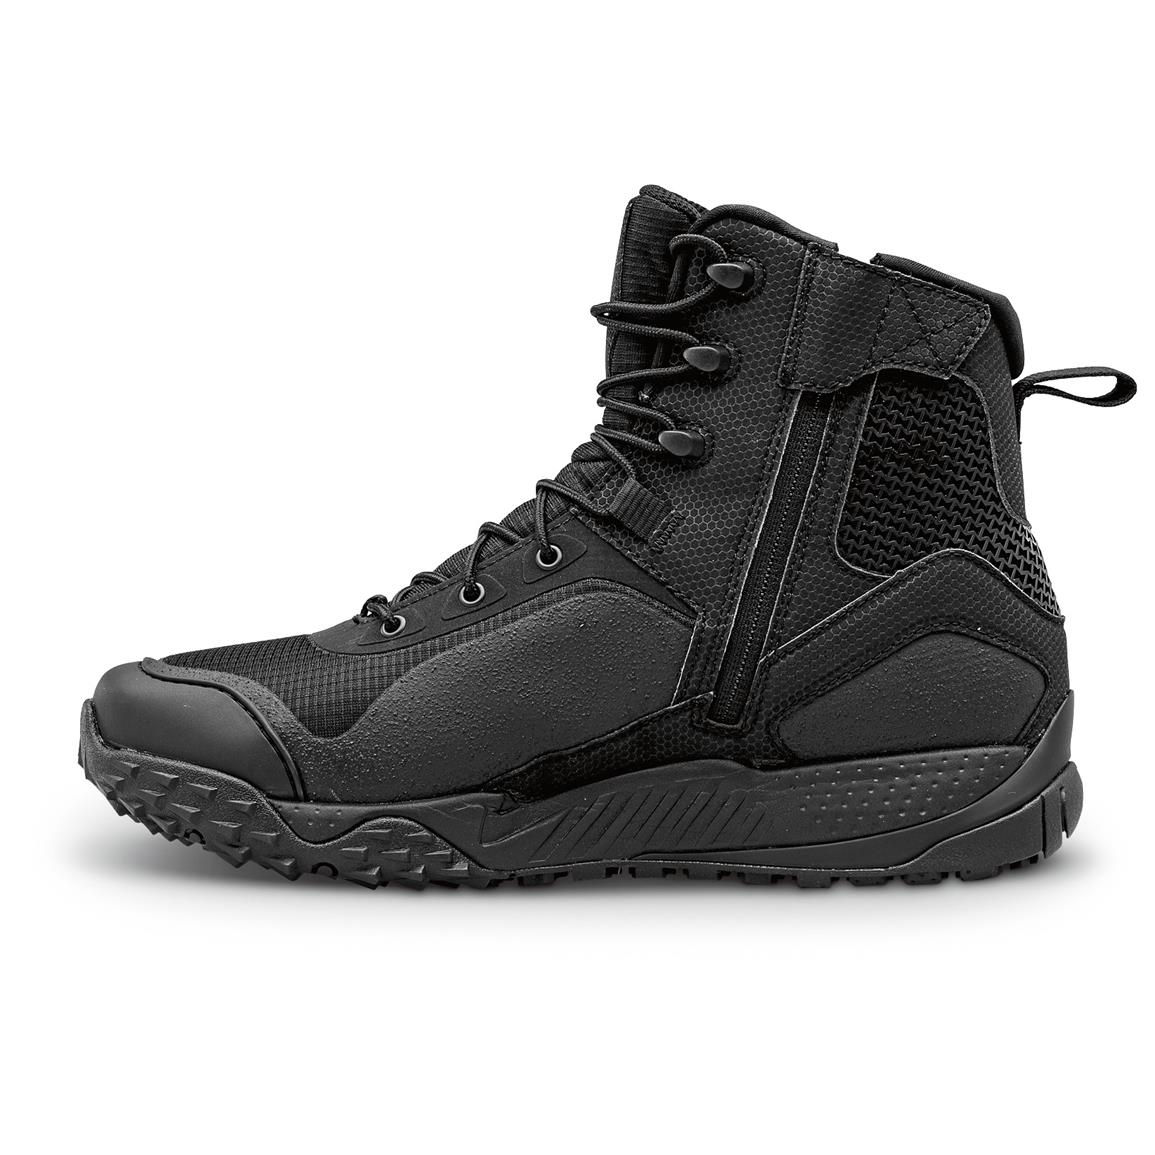 Cheap under armour black tactical boots 